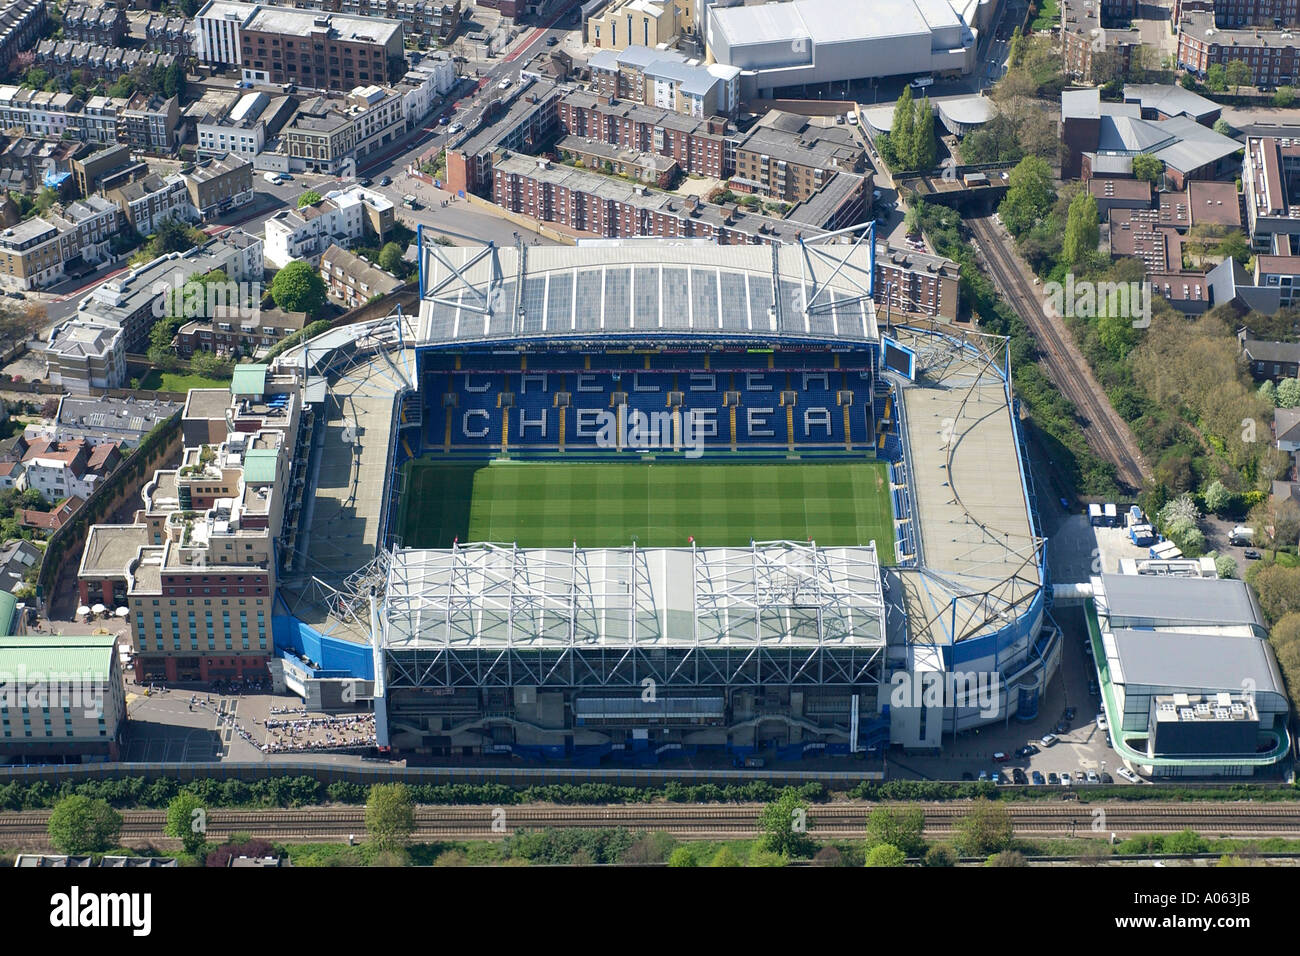 Aerial View Of Chelsea Football Club In London Also Known As Stamford Bridge Stadium Home To The Blues Or The Pensioners Stock Photo Alamy